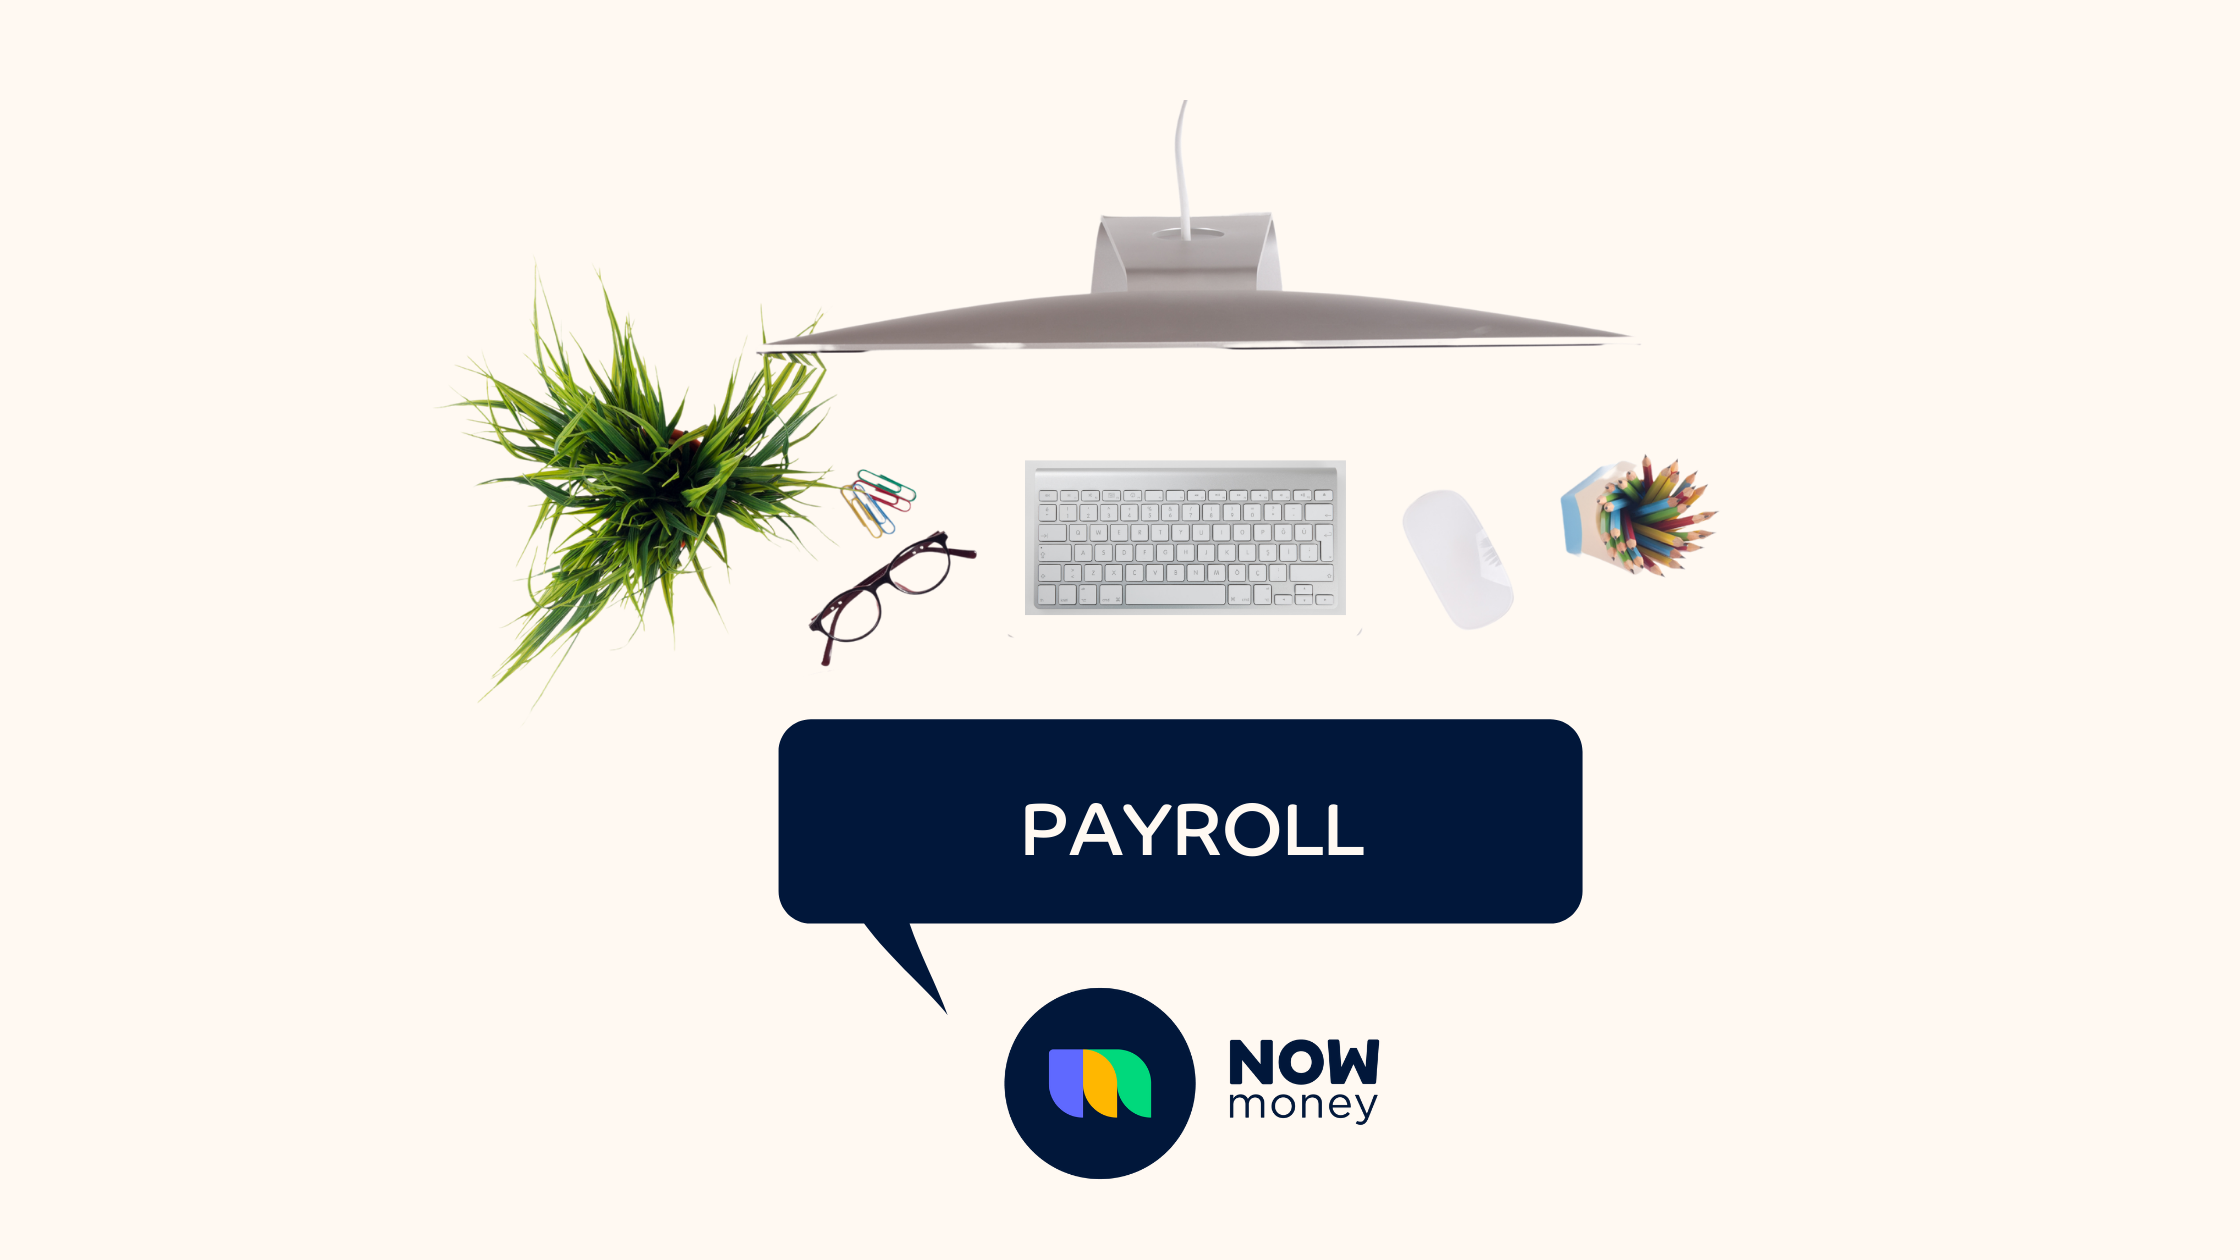 Forget Outsourcing Your Payroll Solutions. This Dubai Payroll Platform Cuts Costs and Headaches